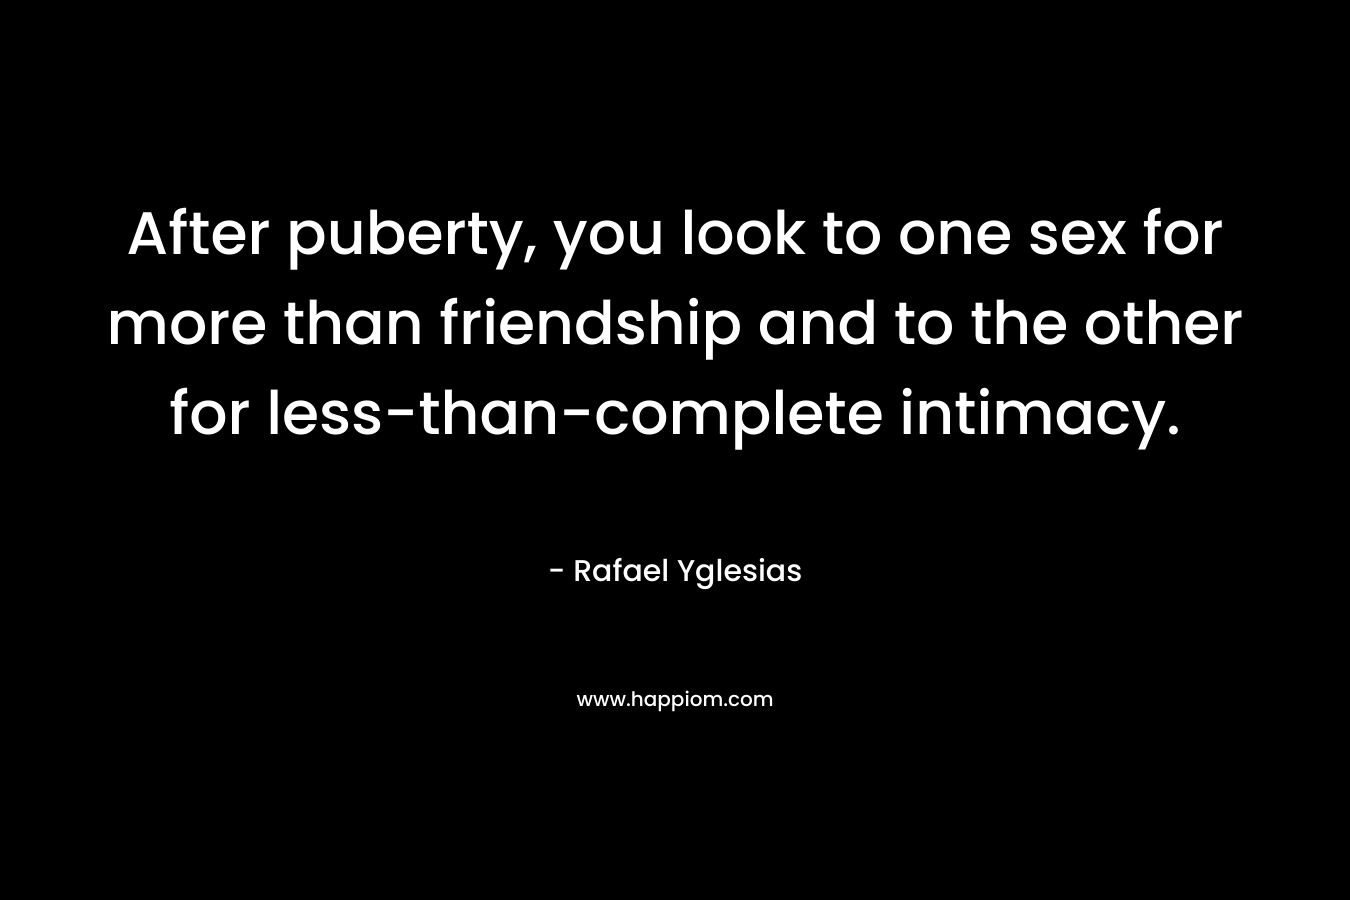 After puberty, you look to one sex for more than friendship and to the other for less-than-complete intimacy.